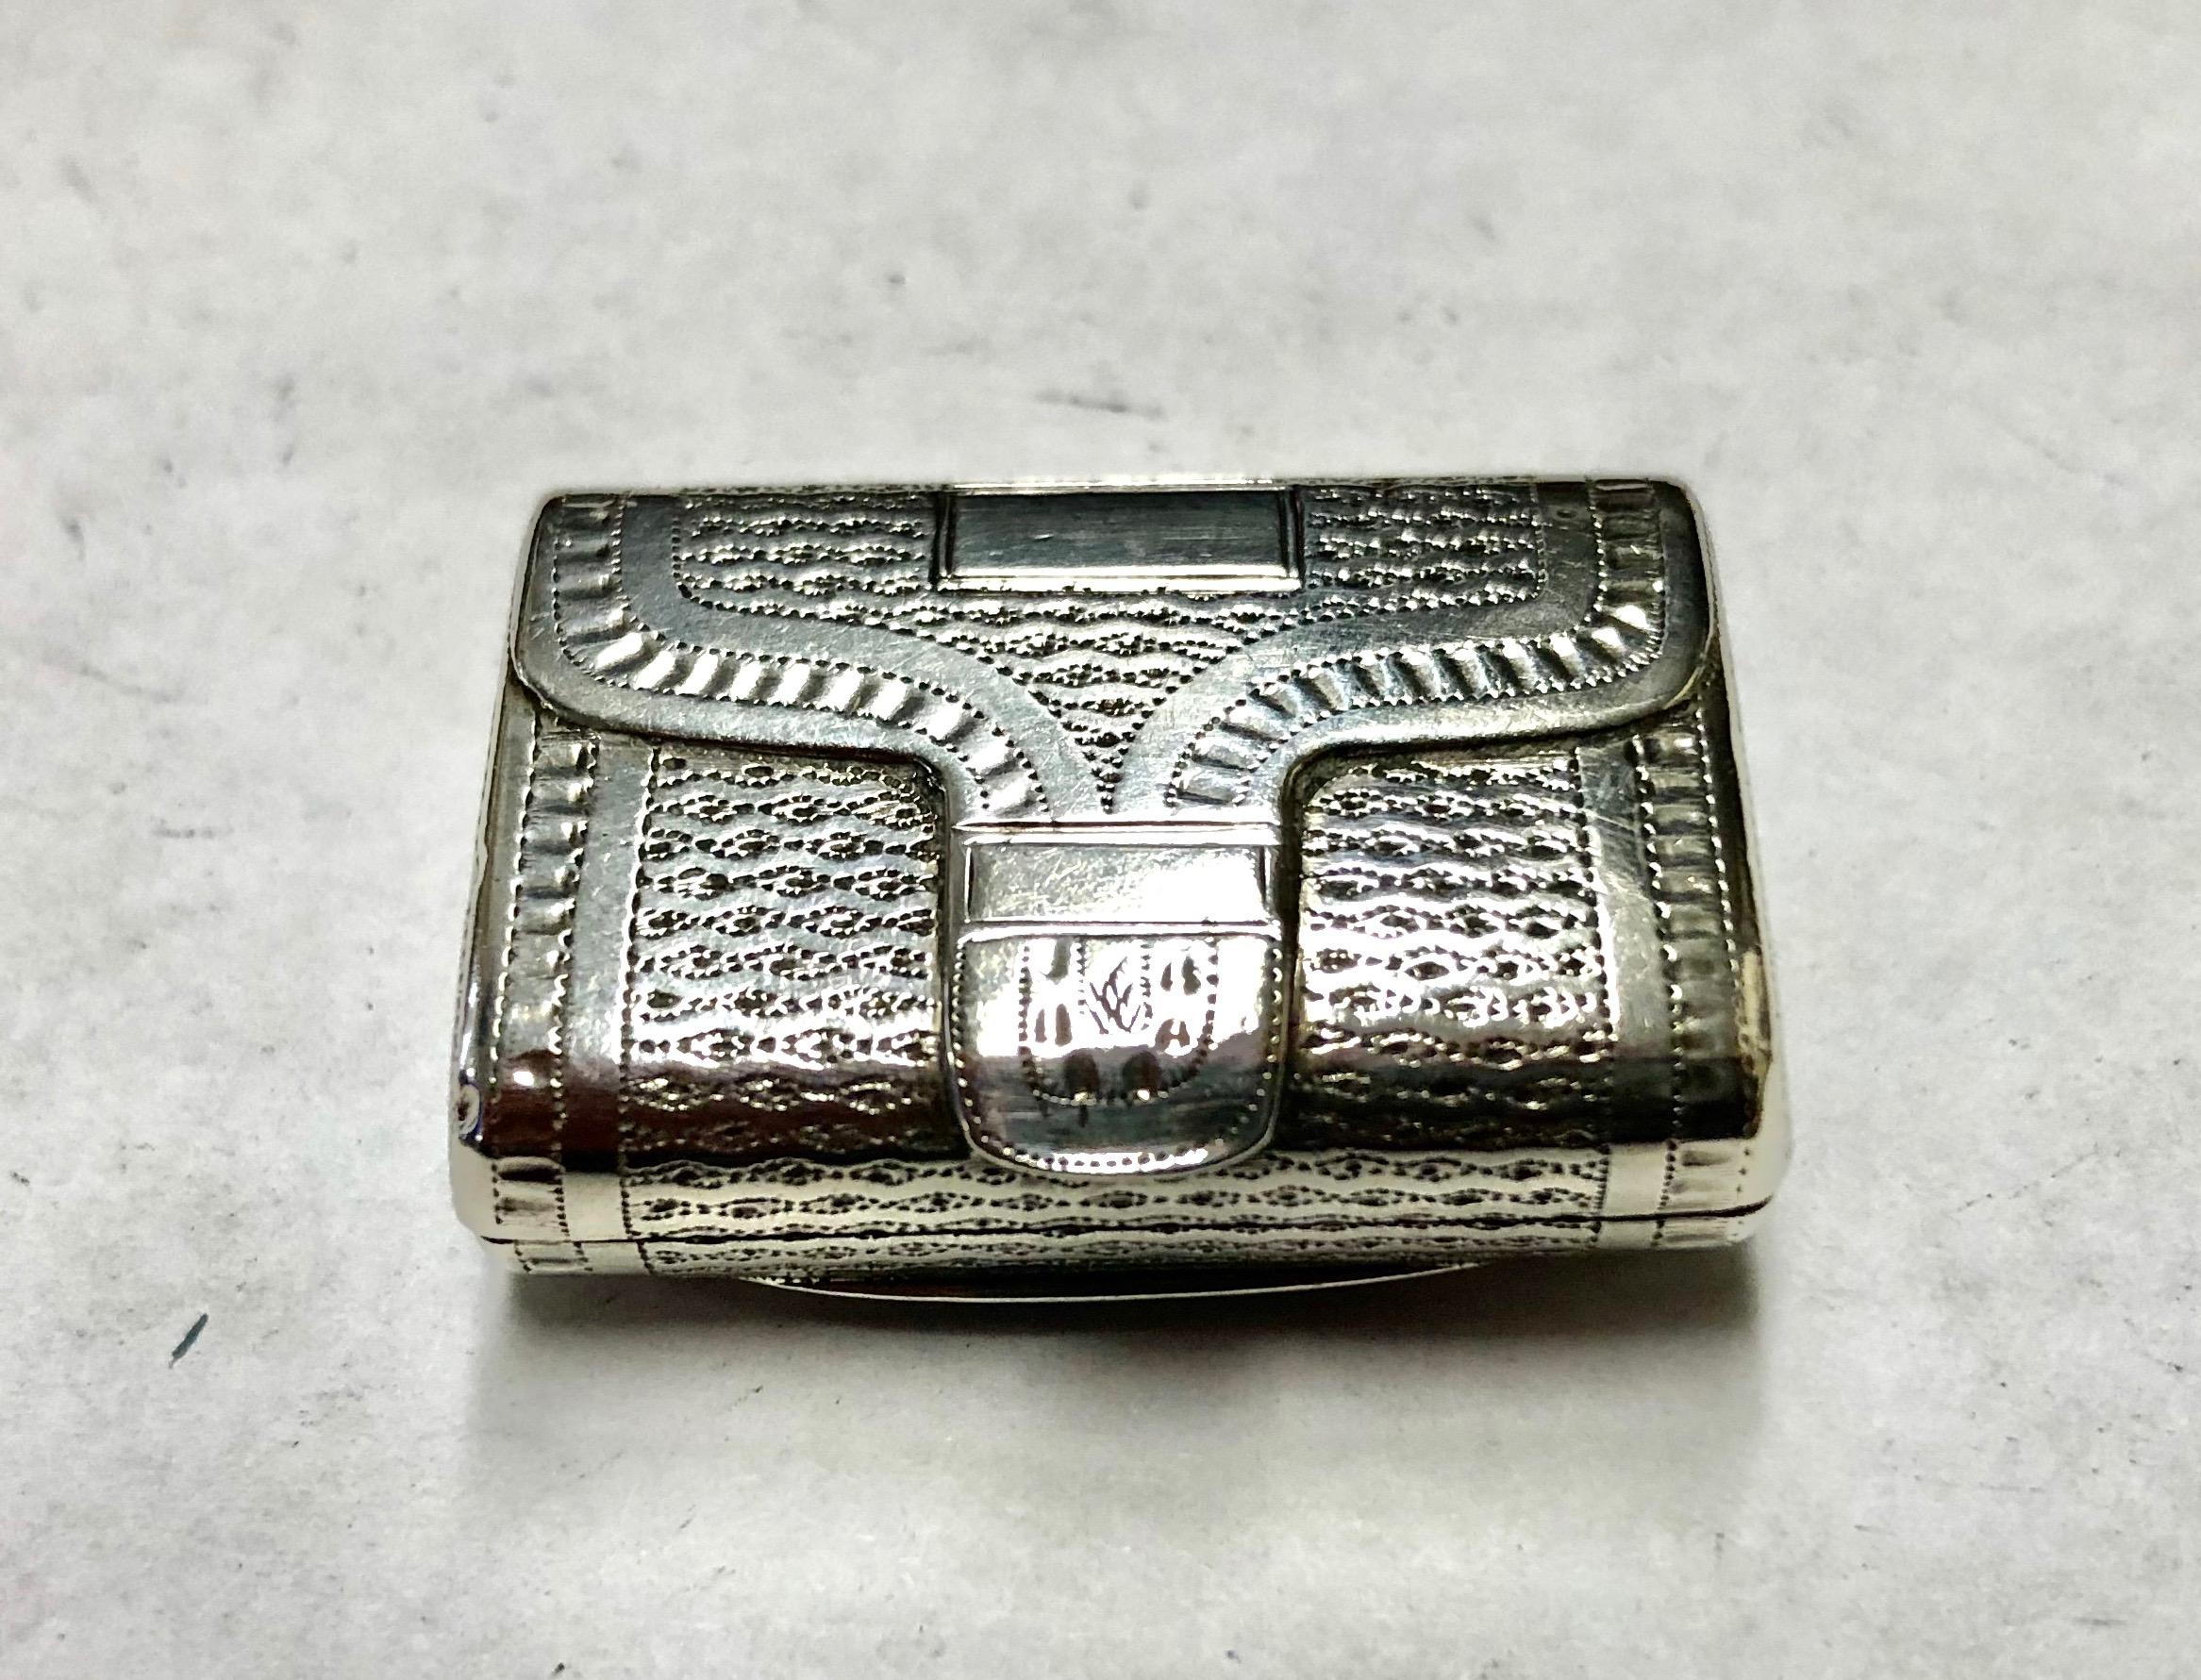 Rare and fabulous George III antique English hand engraved sterling silver Satchel shape vinaigrette.
Maker's Marks for prized small box and vinaigrette silversmith, John Shaw
Birmingham, 1816-1817

A/F Missing interior fold-out pierced grille